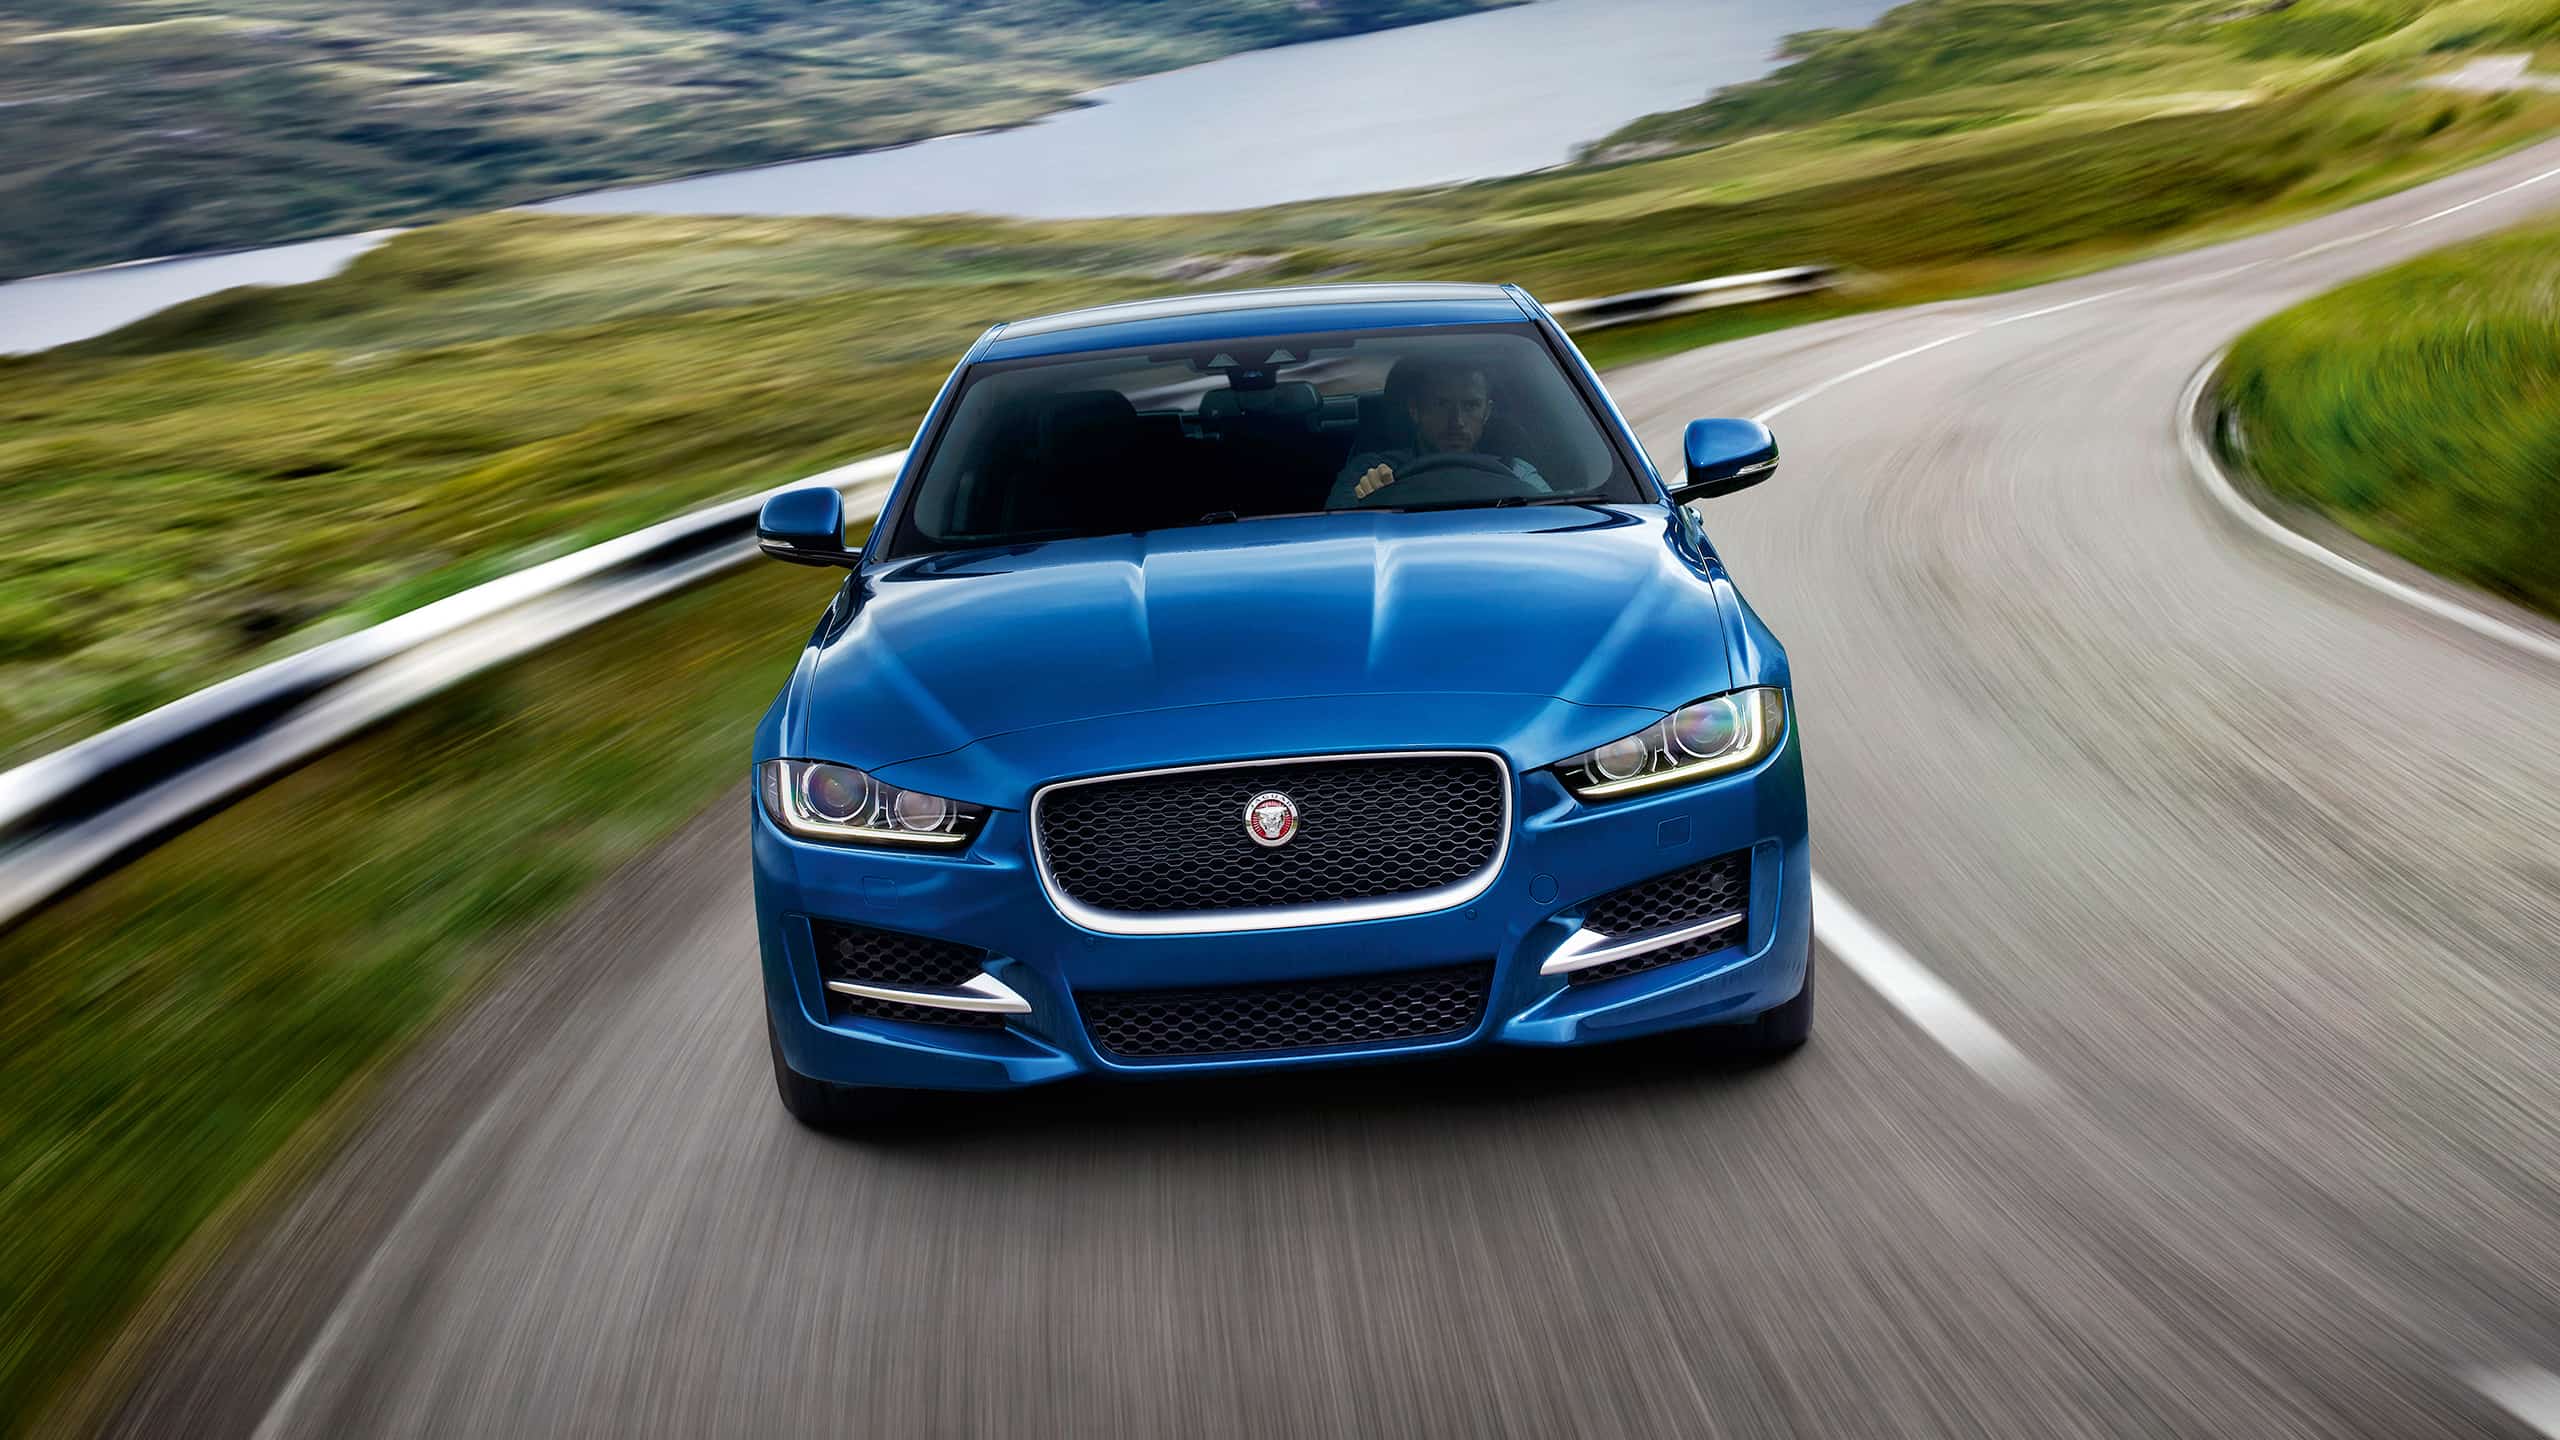 Jaguar XE Moving on Hilly River Road